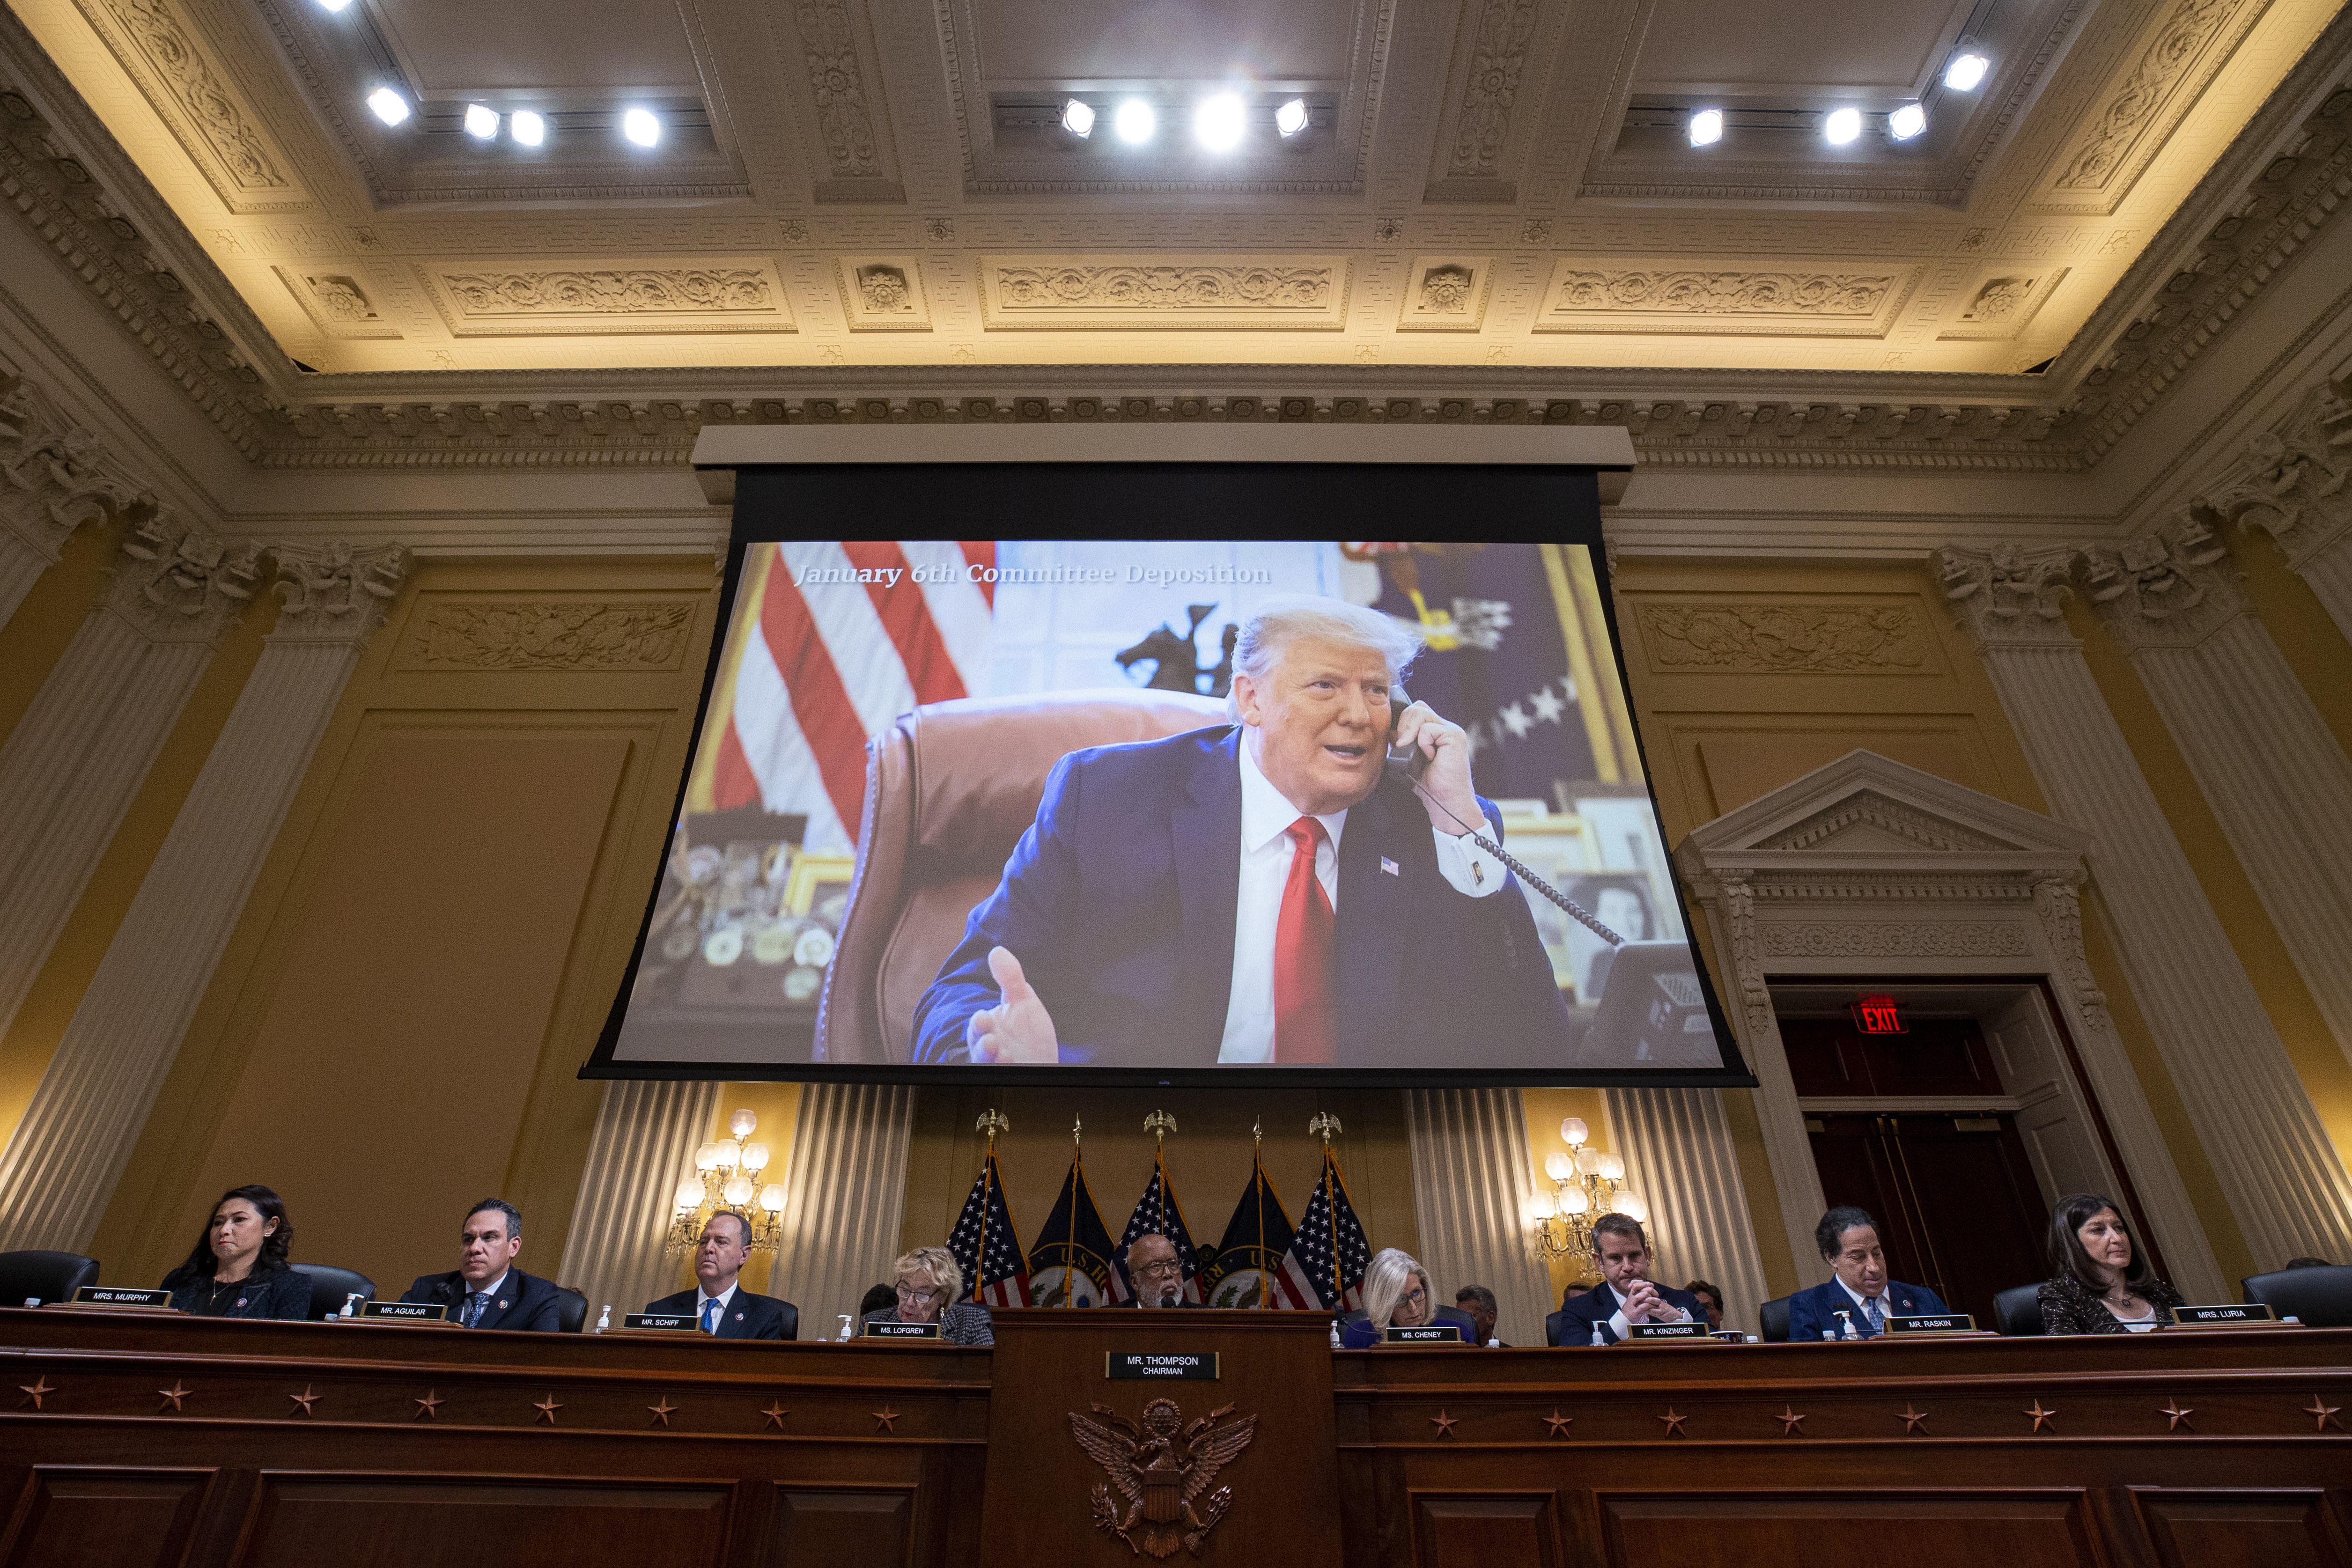 Image of former U.S. President Donald Trump displayed on a screen.